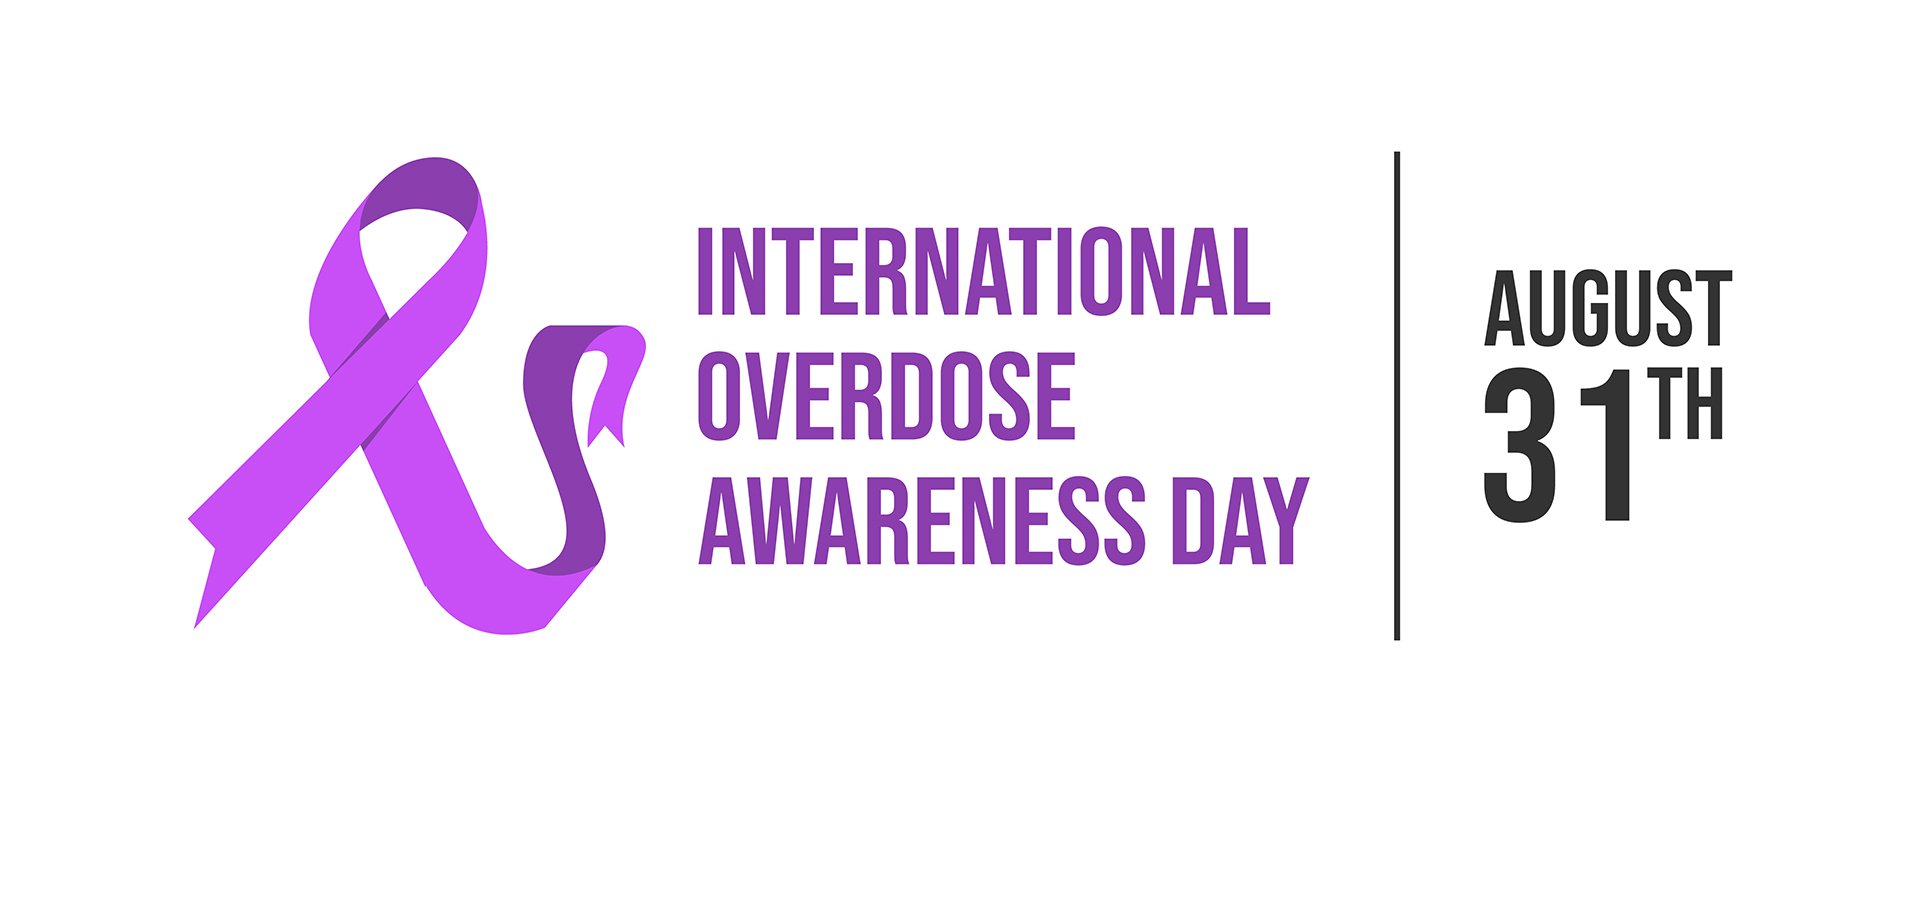 a purple ribbon and date of august 31st reminds us to remember the ones we've lost on international overdose awareness day